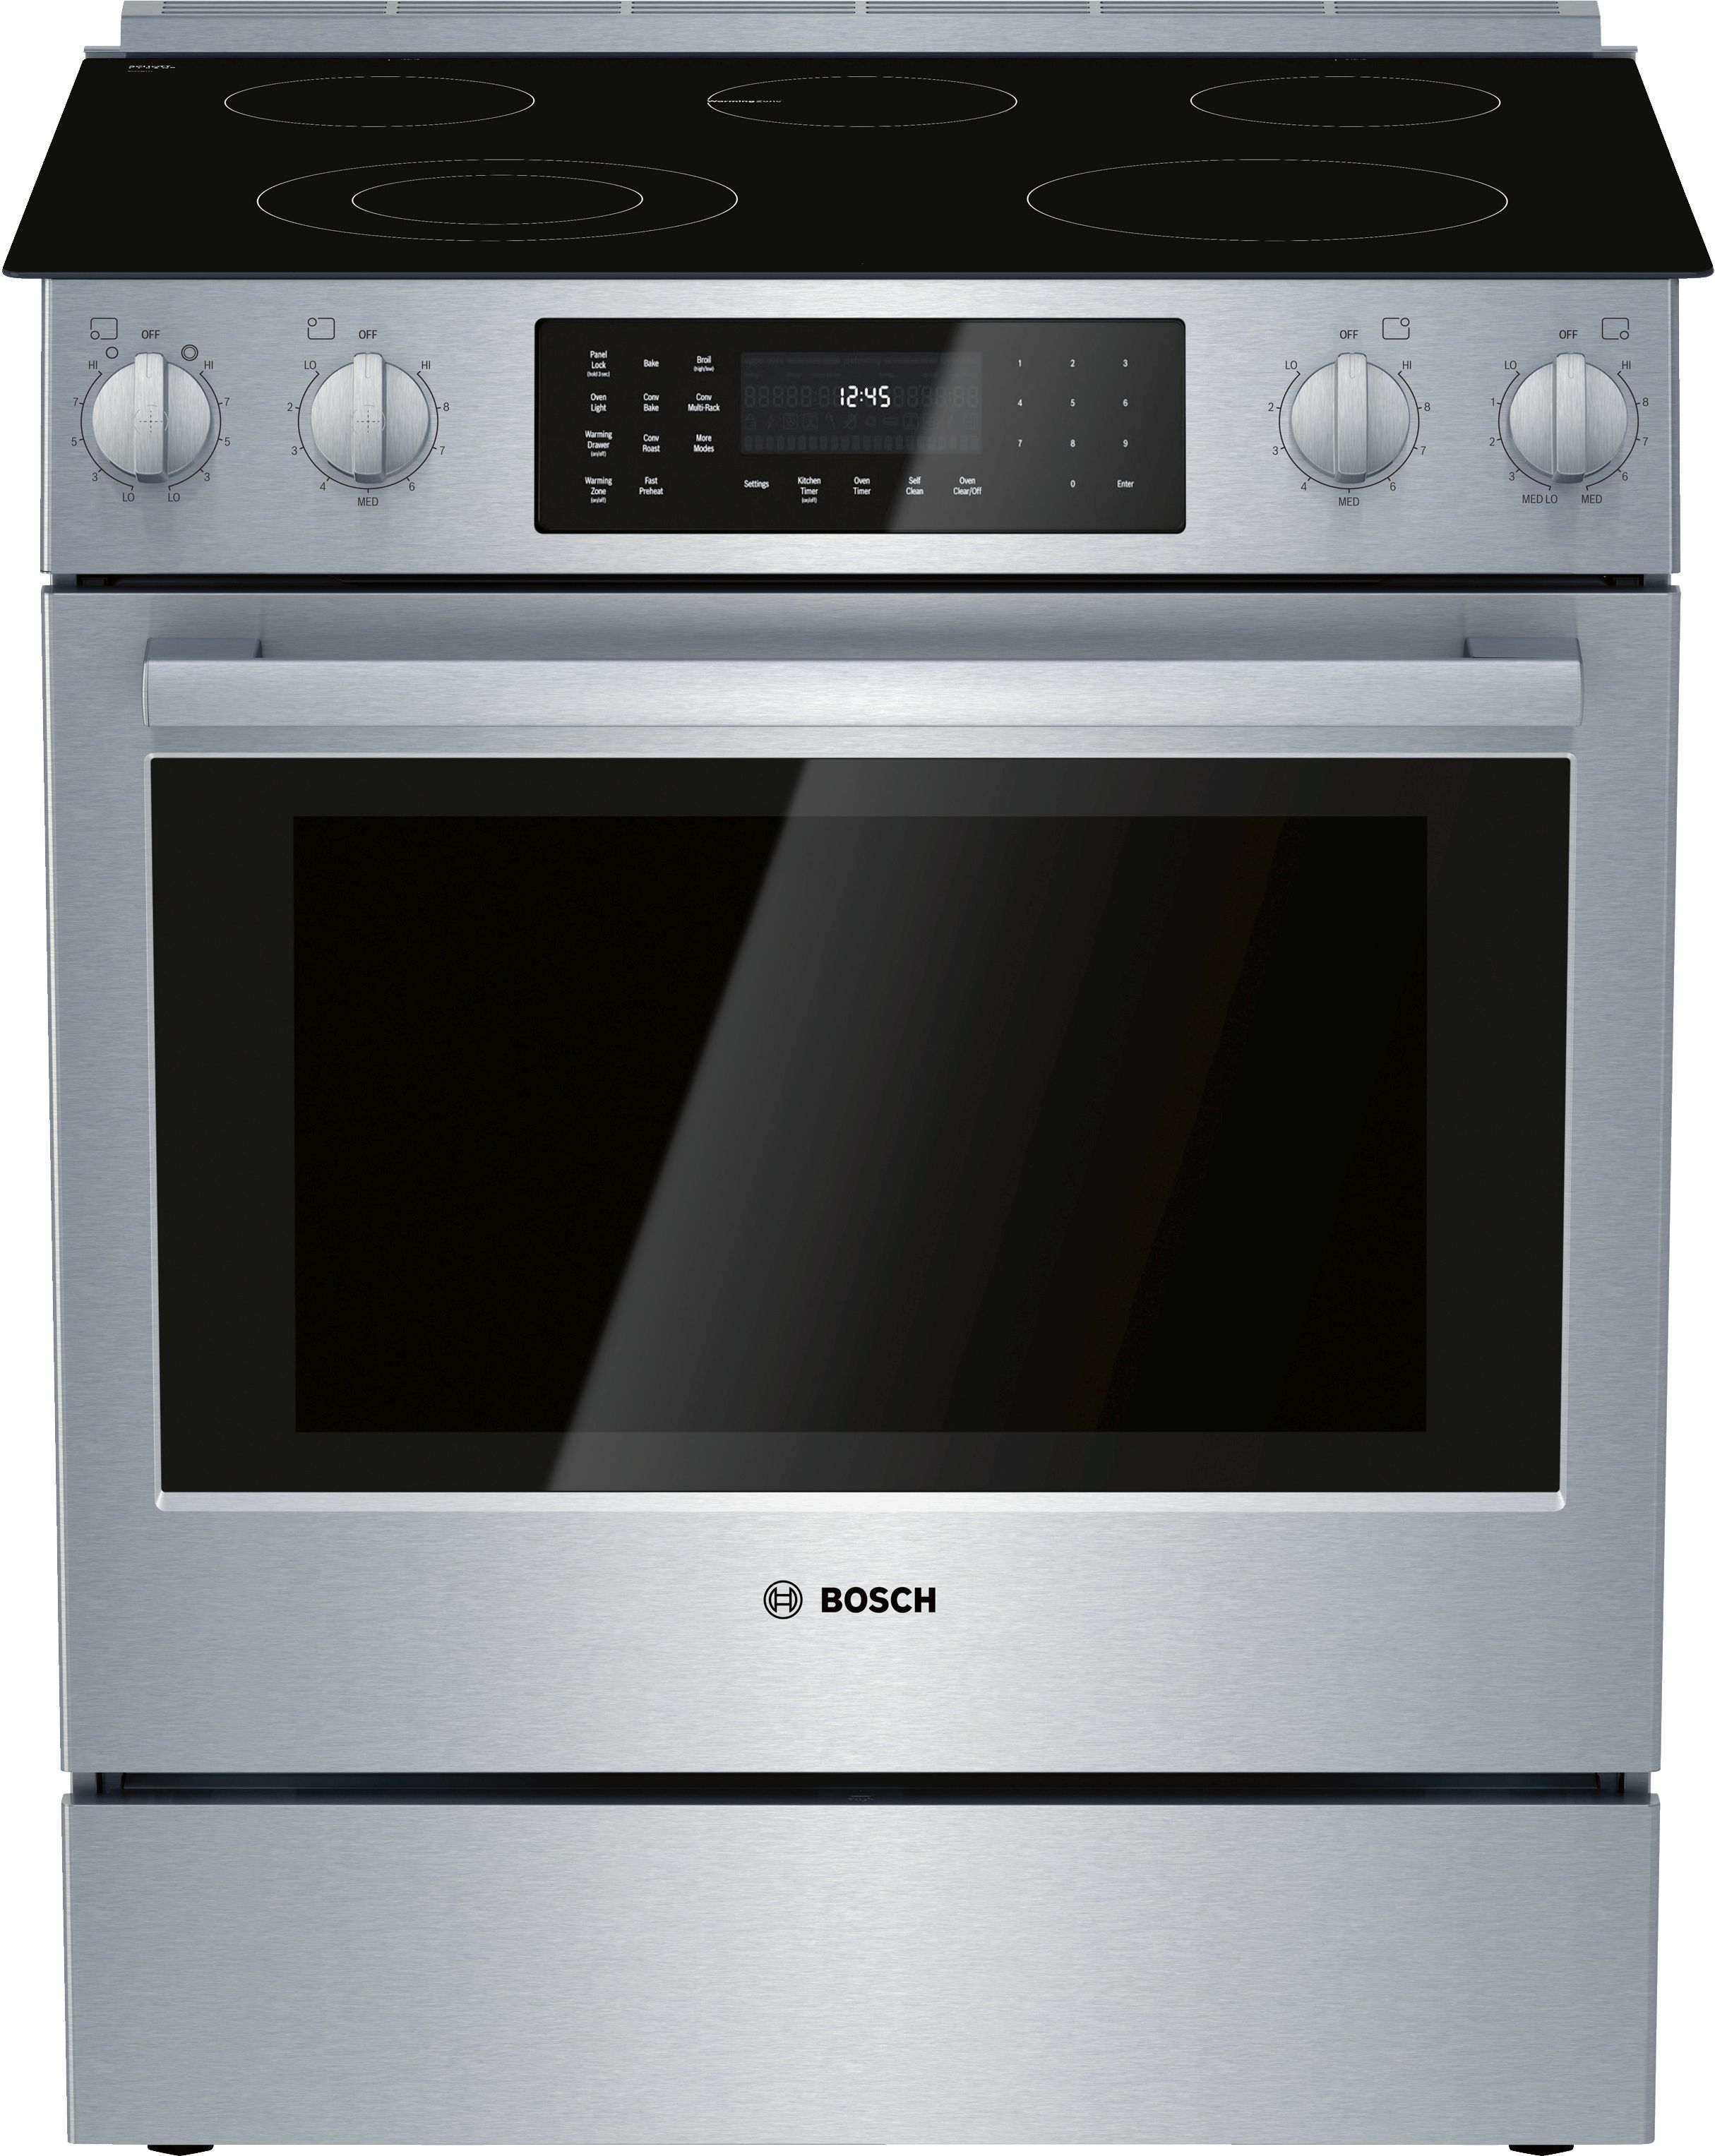 Front view of Bosch HEI8056U stainless steel electric range